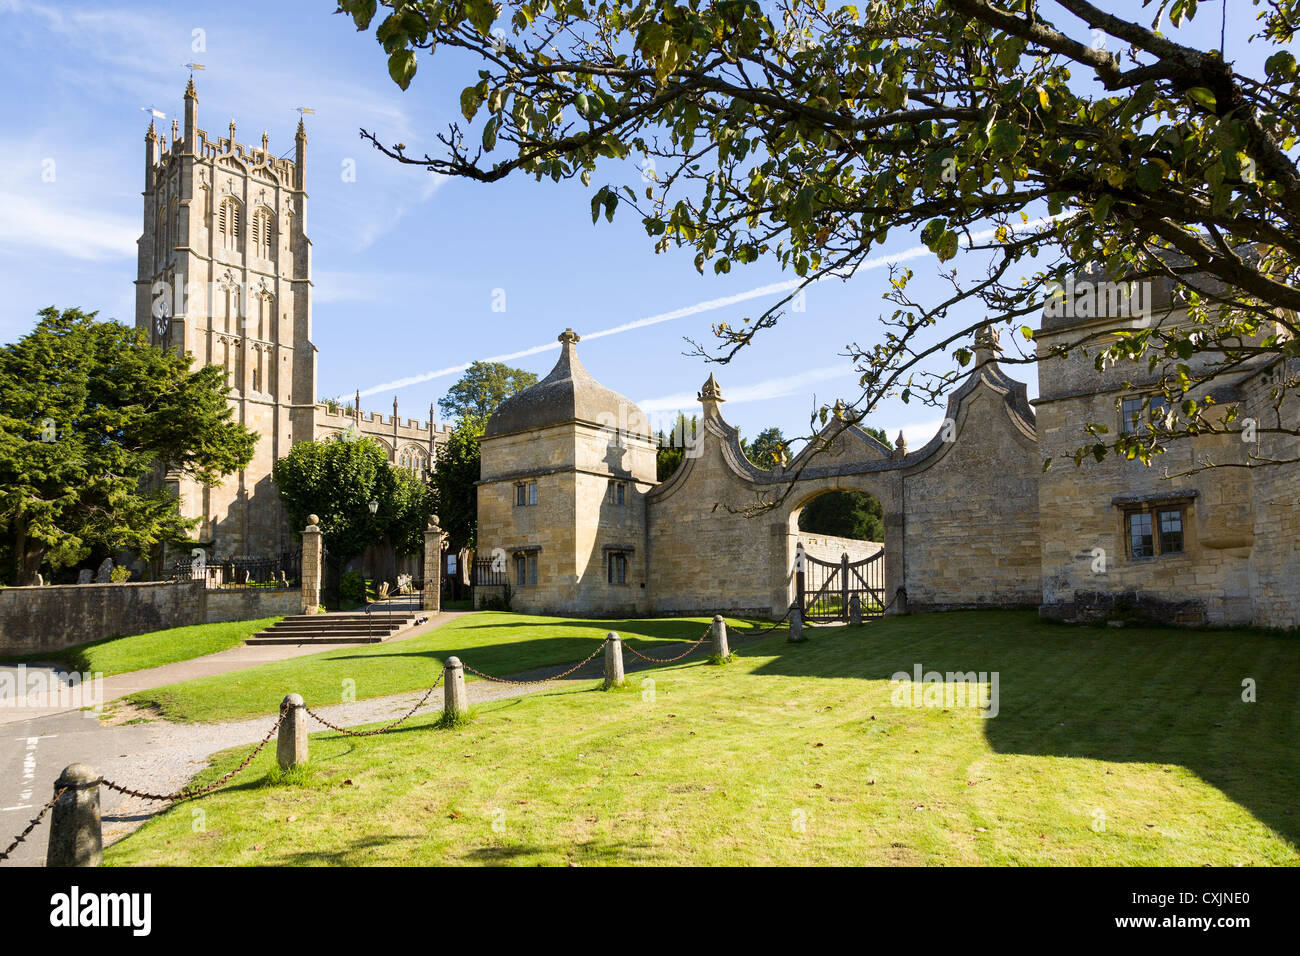 St James Church and gateway to Campden house in old Cotswolds town of Chipping Campden, England, UK Stock Photo